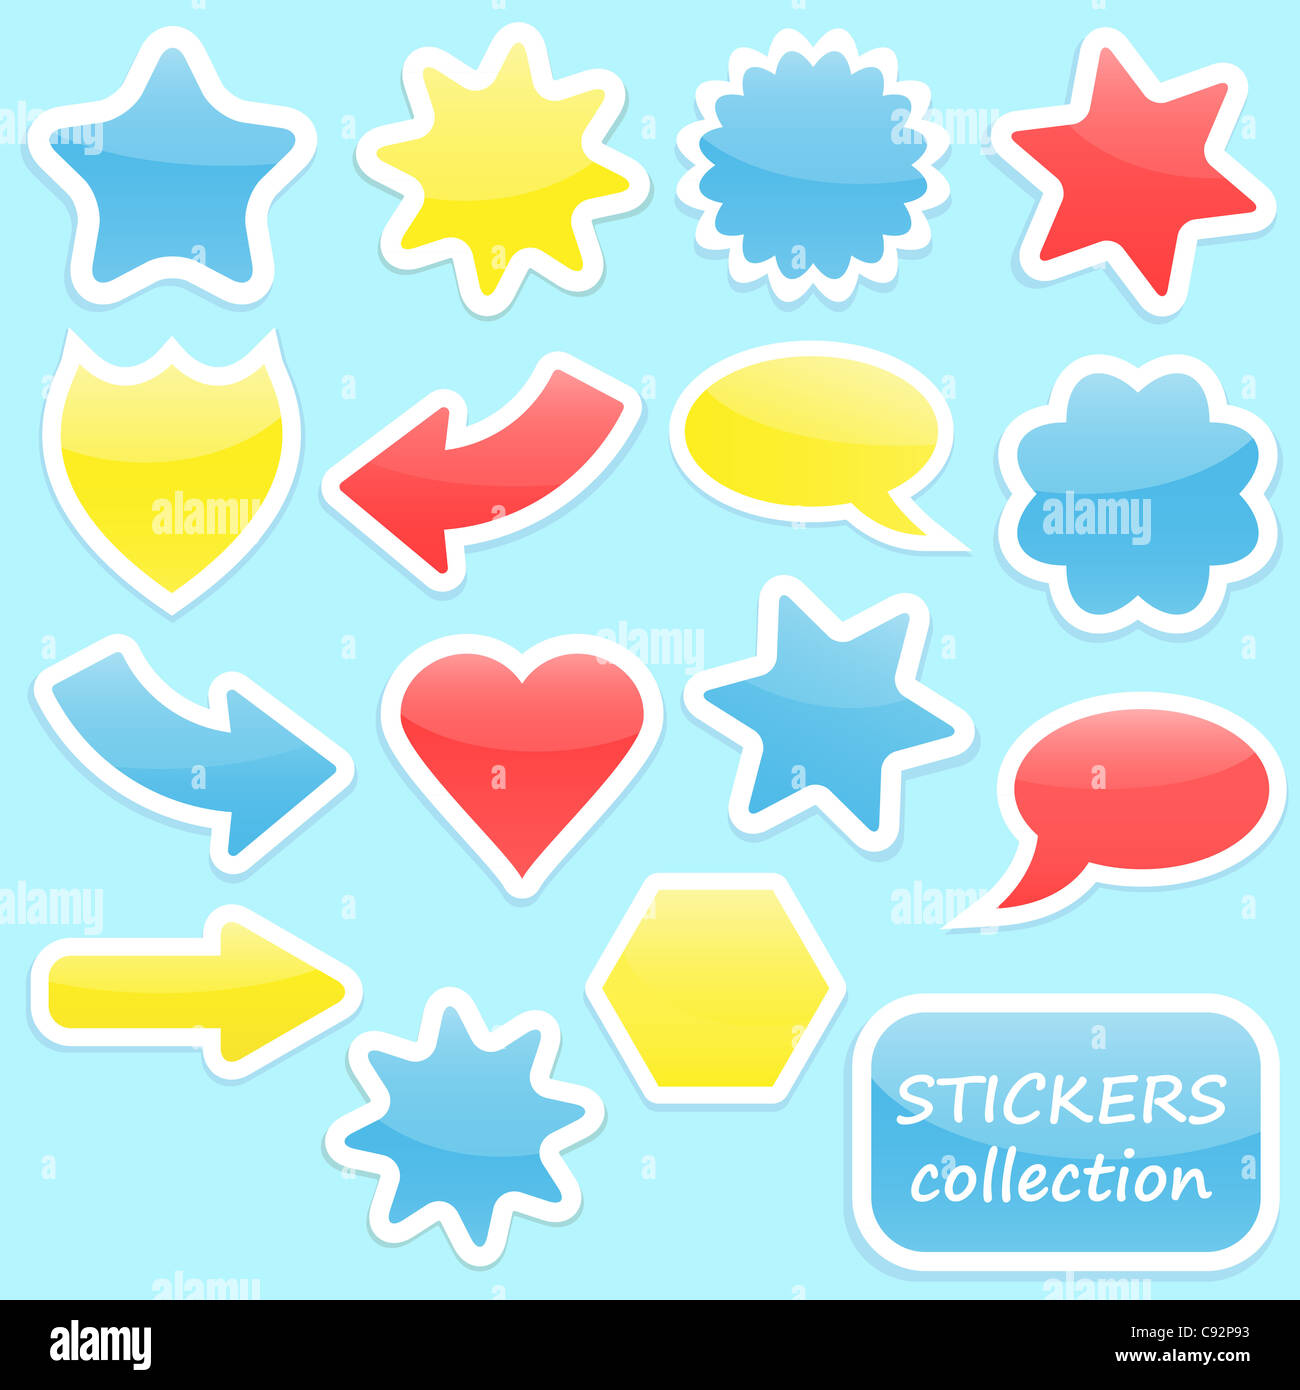 Colorful stickers collection Stock Photo